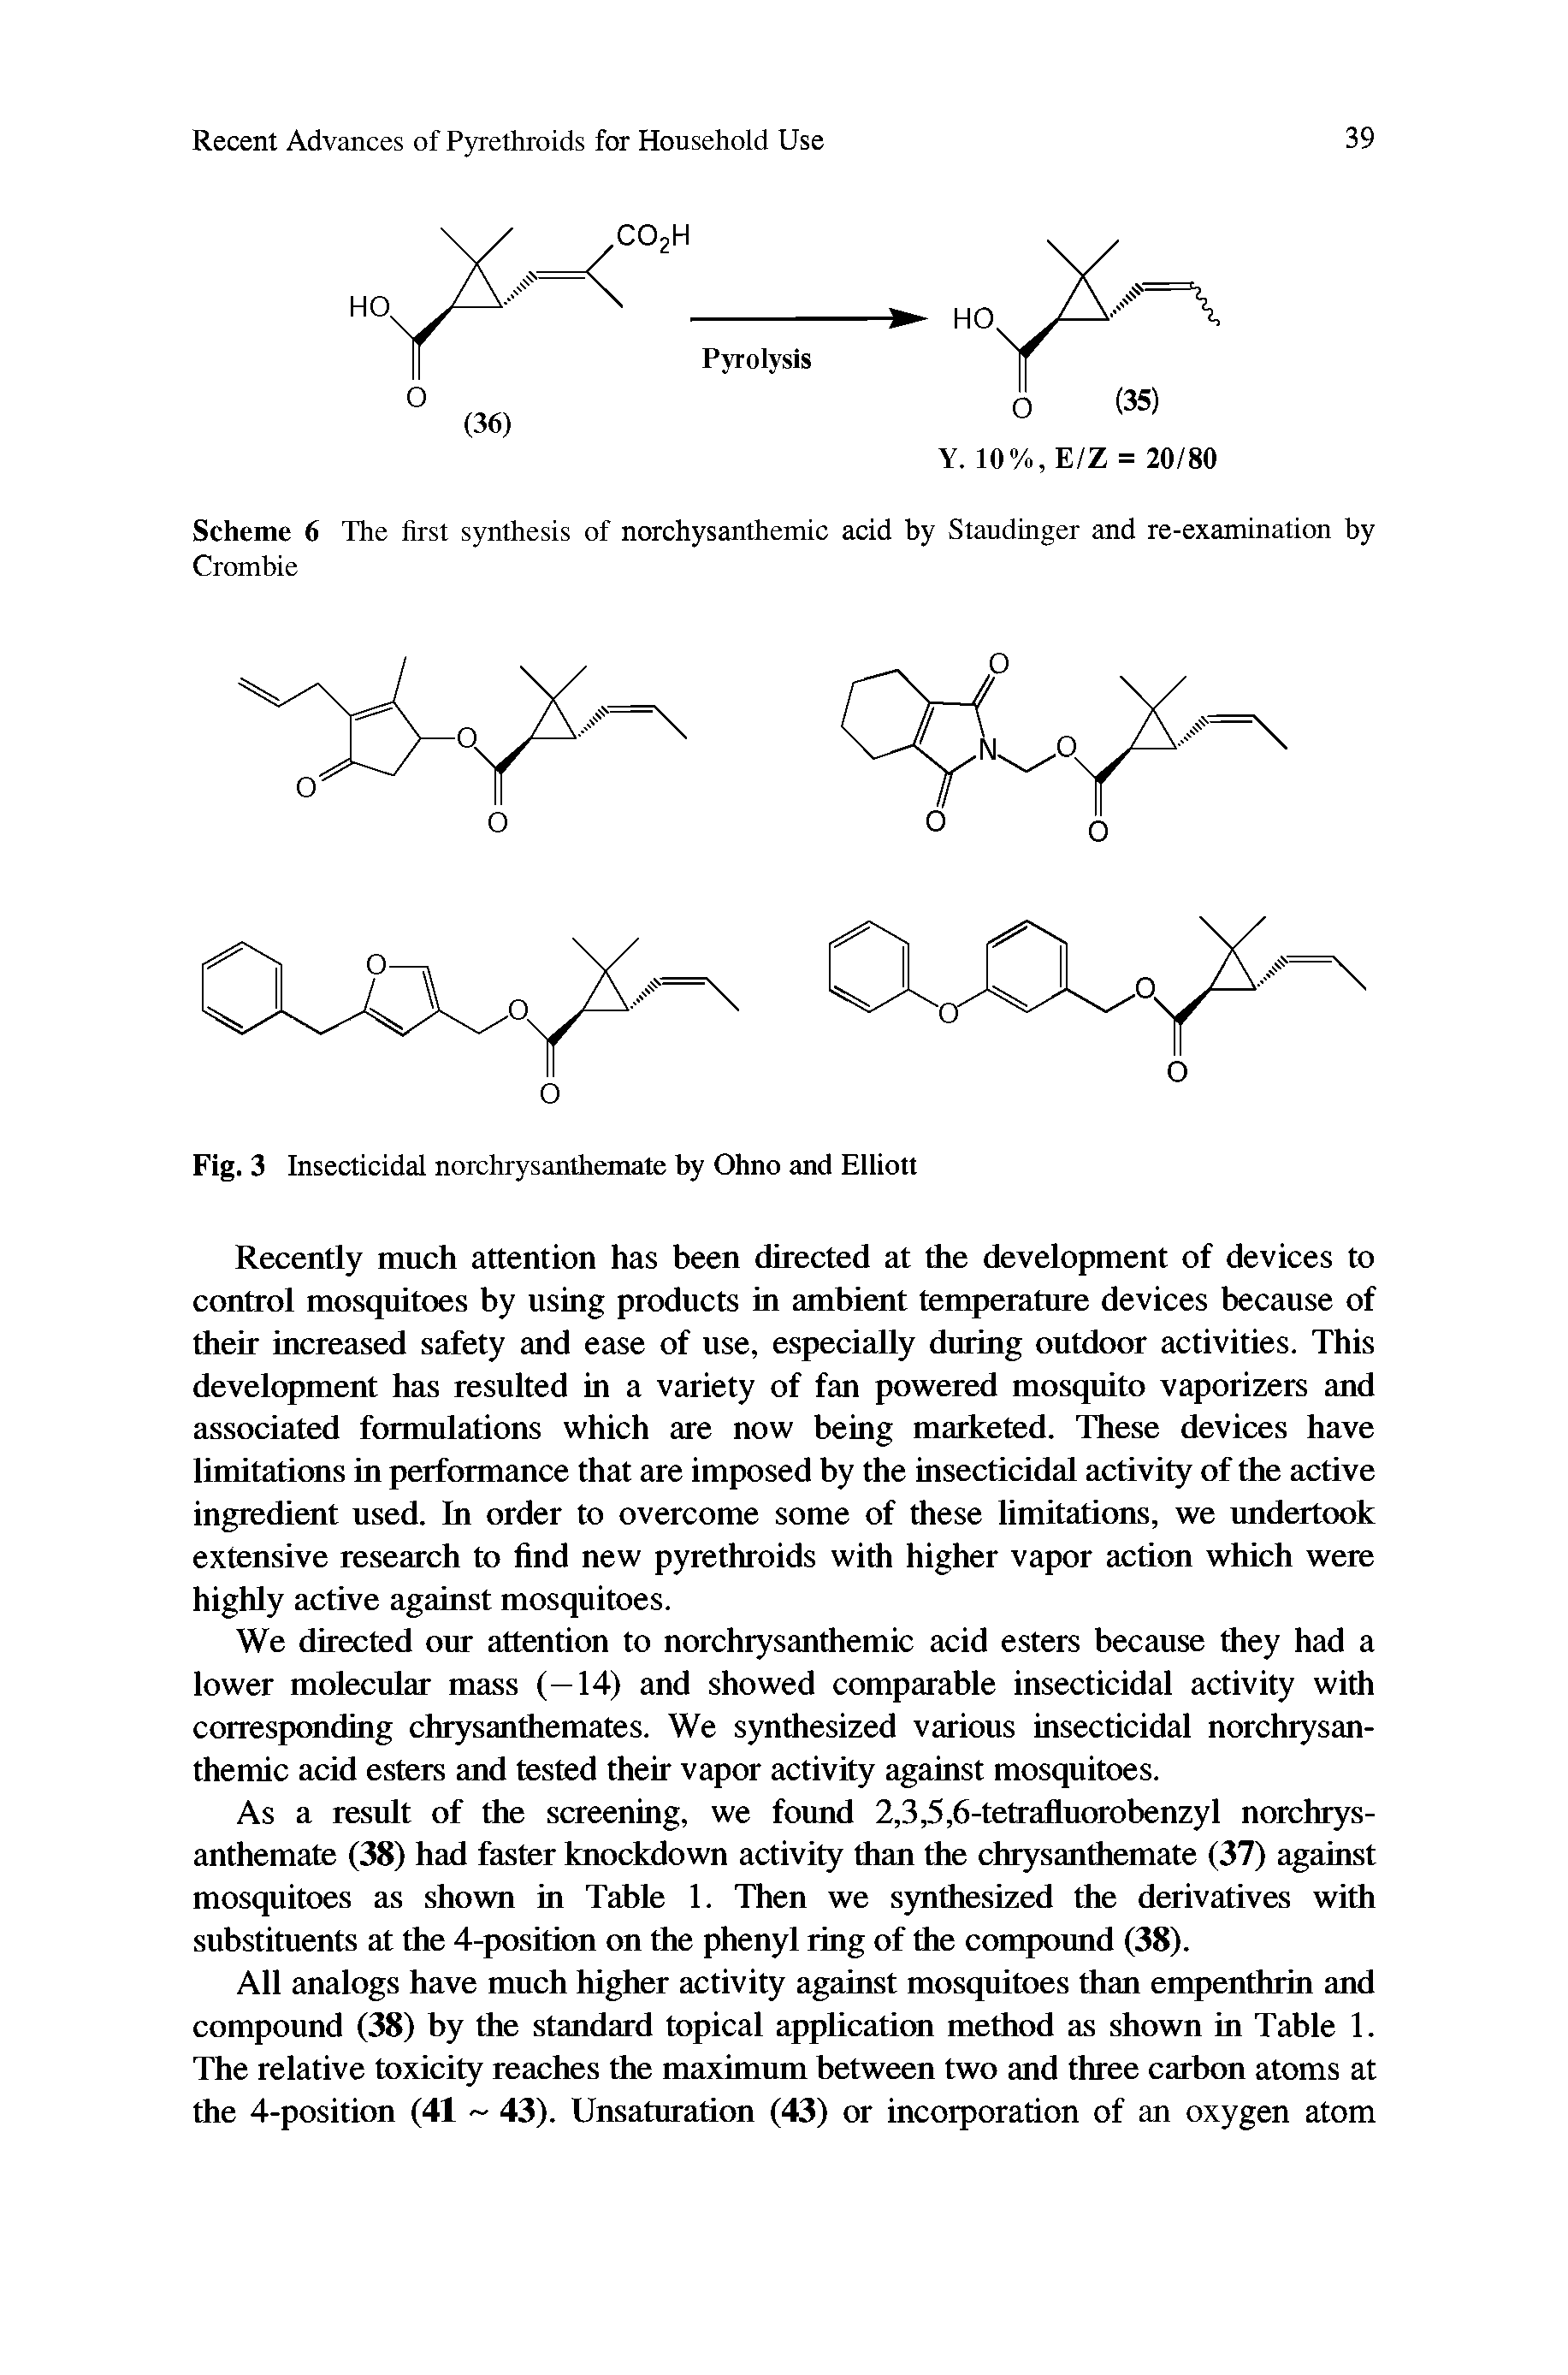 Scheme 6 The first synthesis of norchysanthemic acid by Staudinger and re-examination by Crombie...